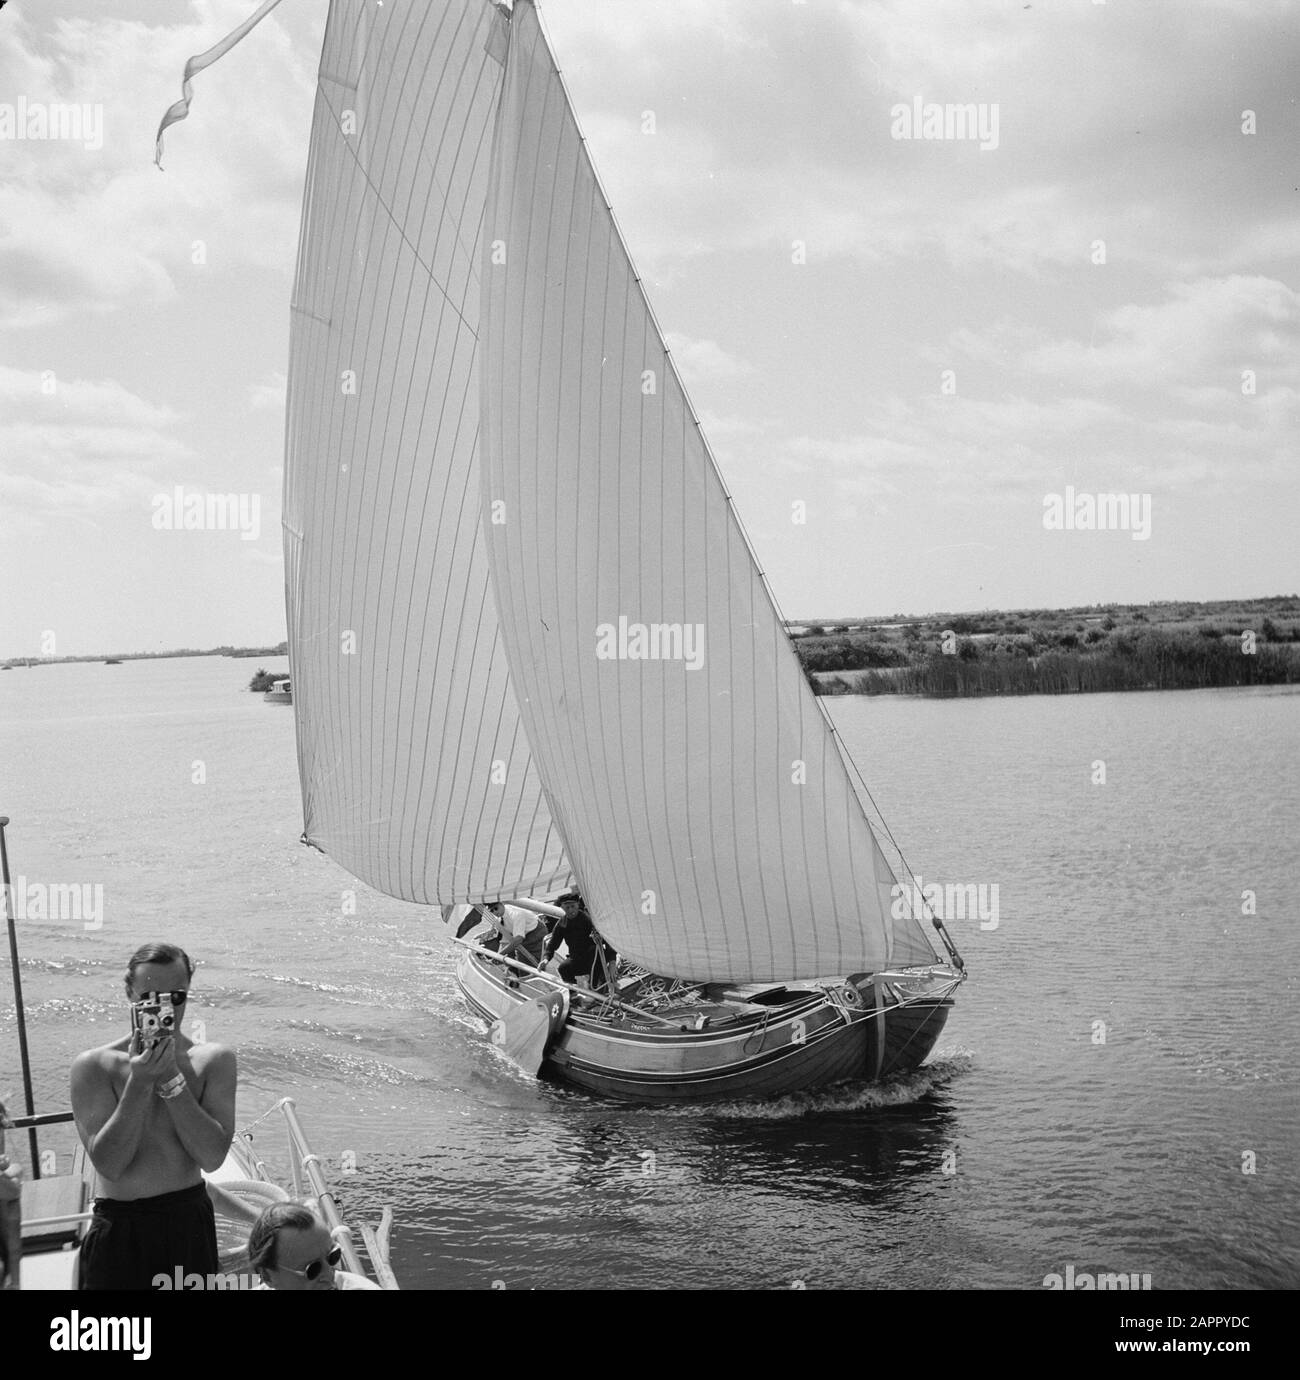 The princely family in Friesland  Prins Bernhard films from the aft deck of a boat Date: 1947 Location: Friesland Keywords: film cameras, royal house, lakes, princes, sailing ships Stock Photo